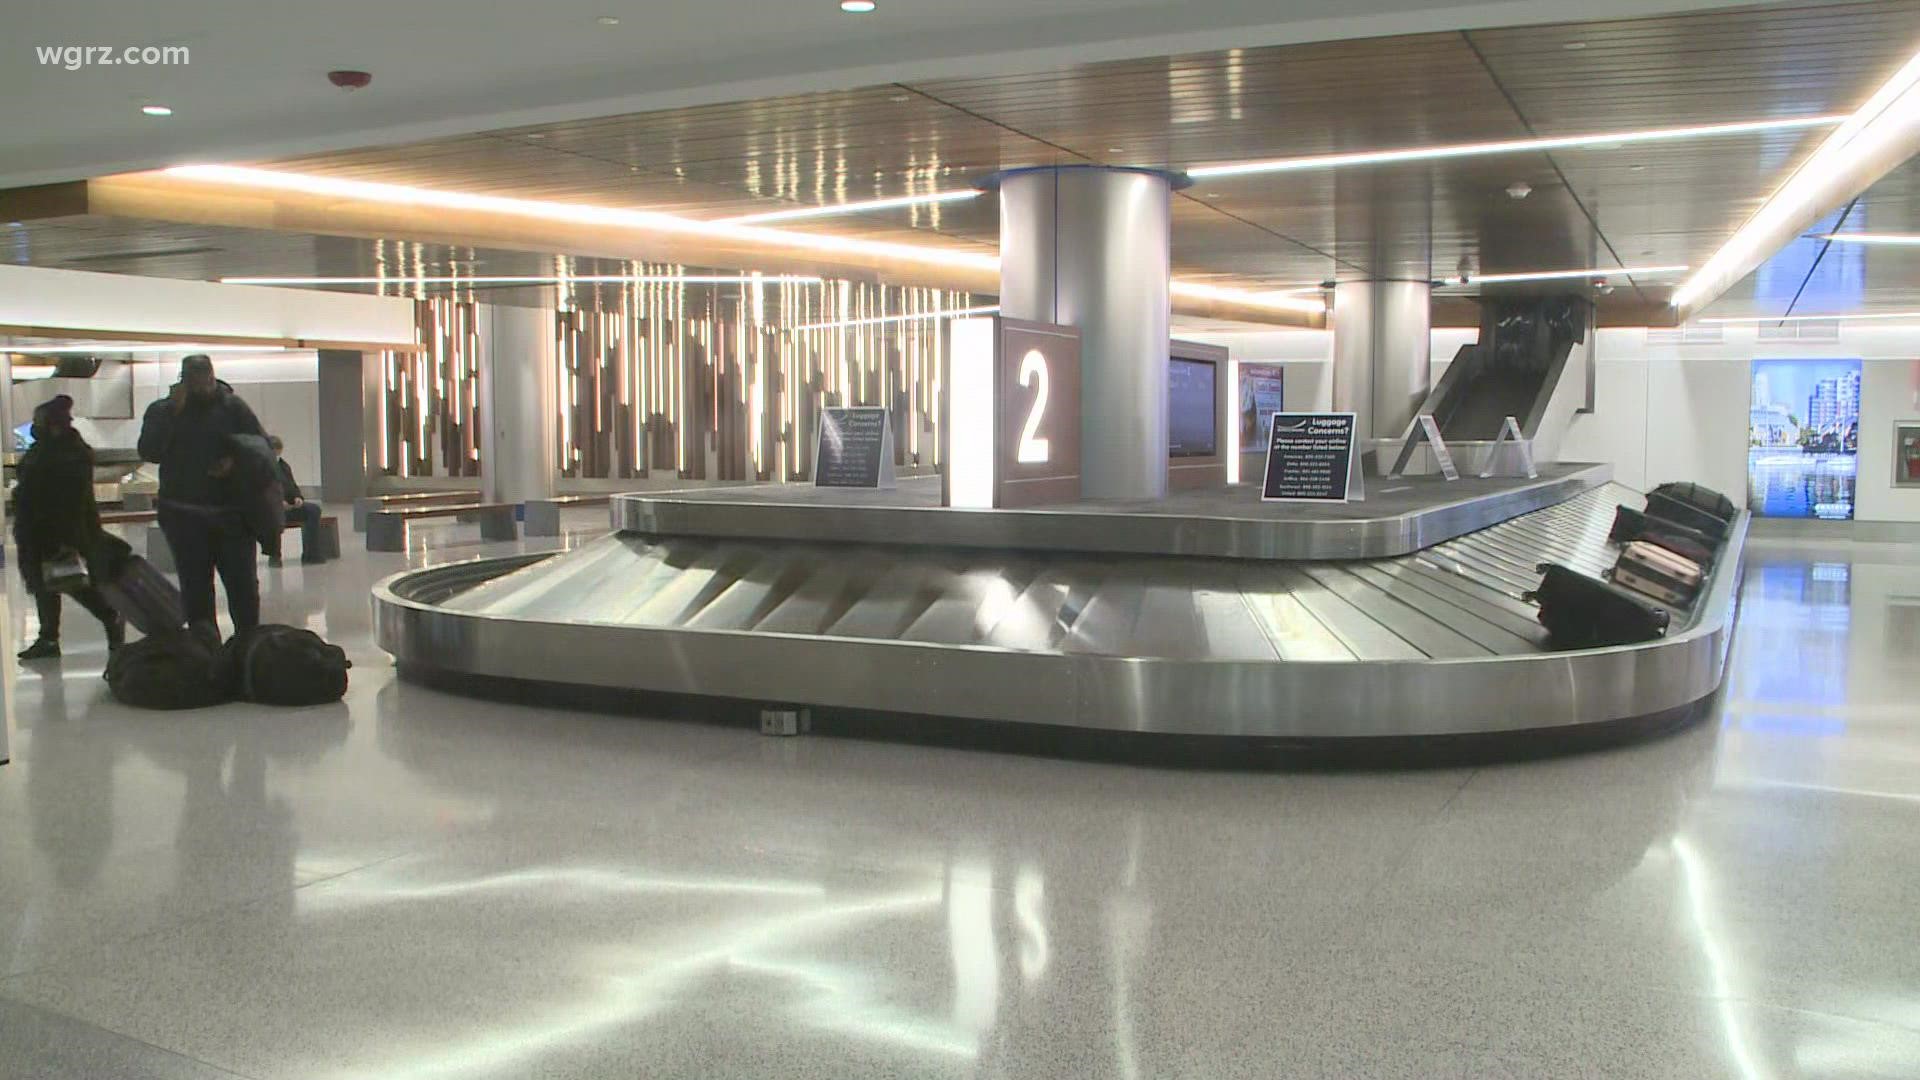 The TSA says during this Thanksgiving travel period, that runs from Friday, November 19th through Sunday, the 28th, is expected to screen about 20 million passenger